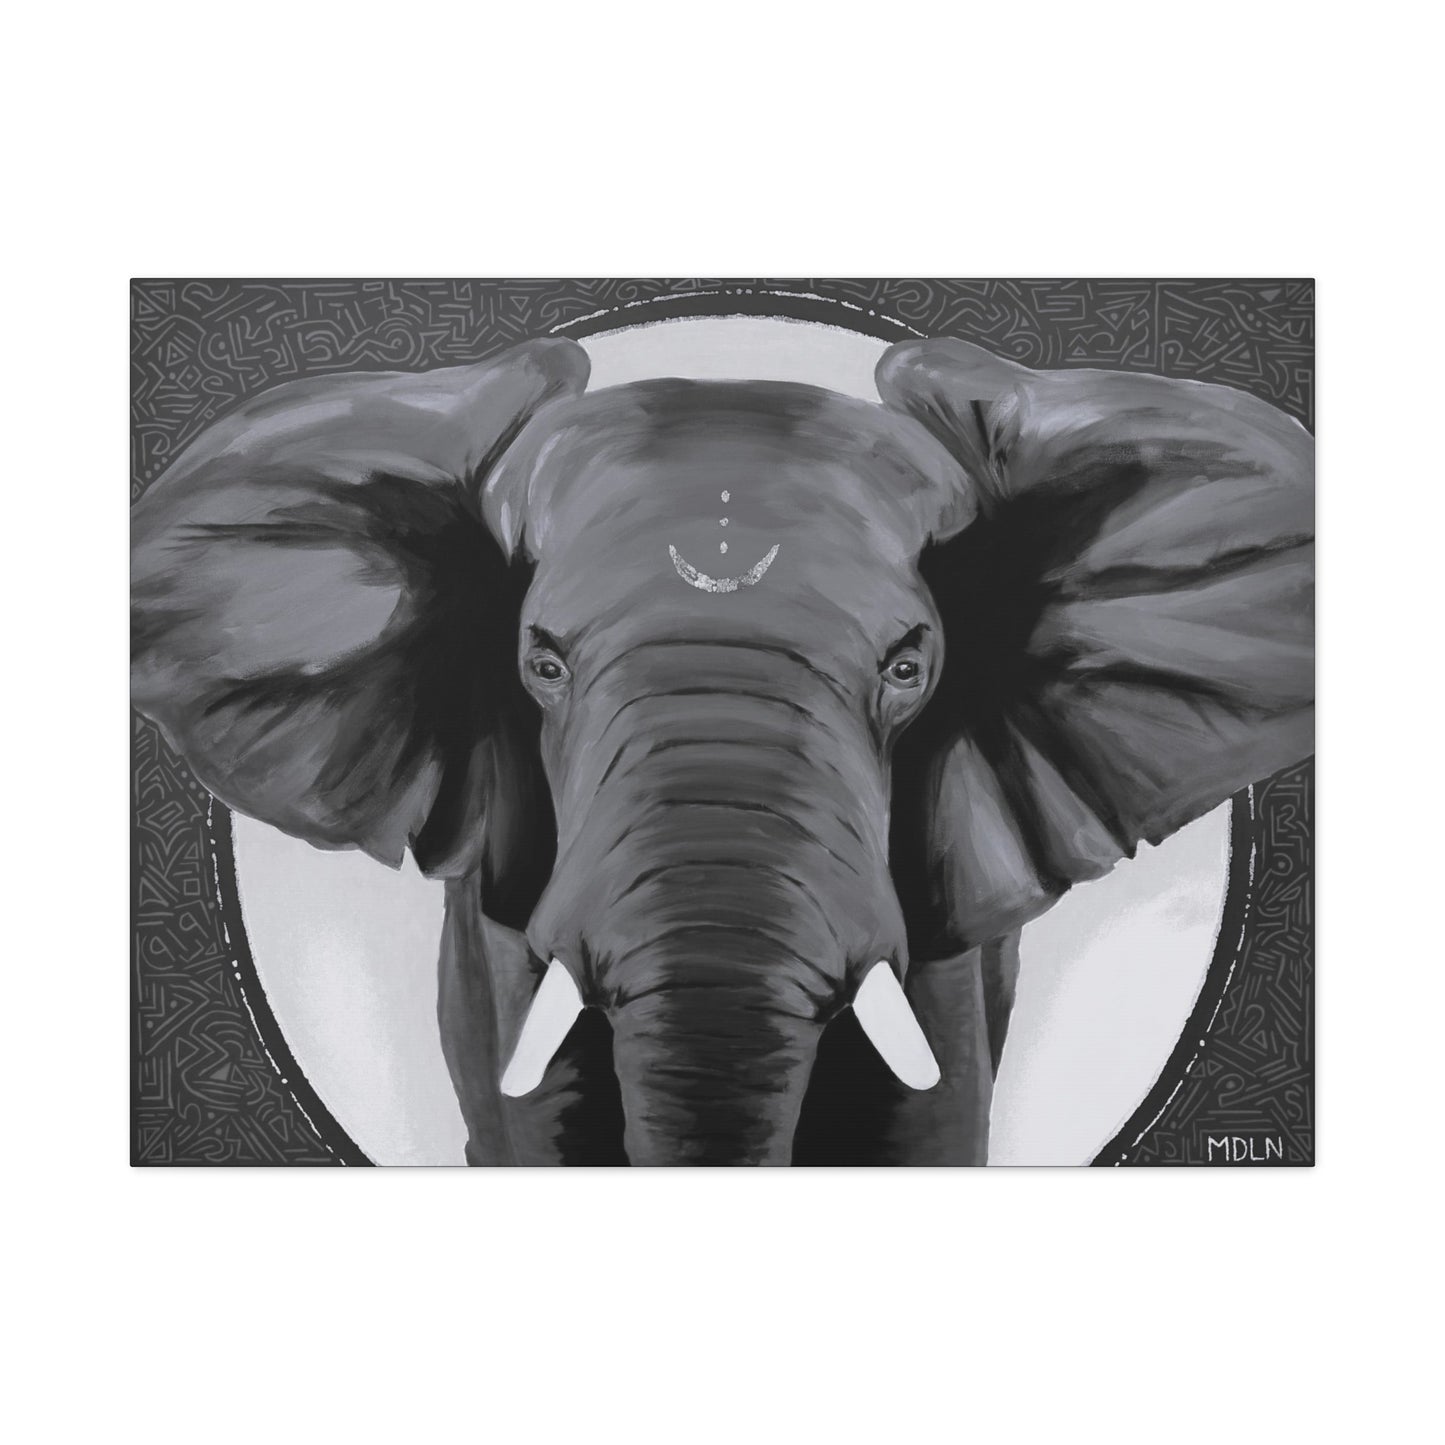 Black and white African elephant art print on canvas